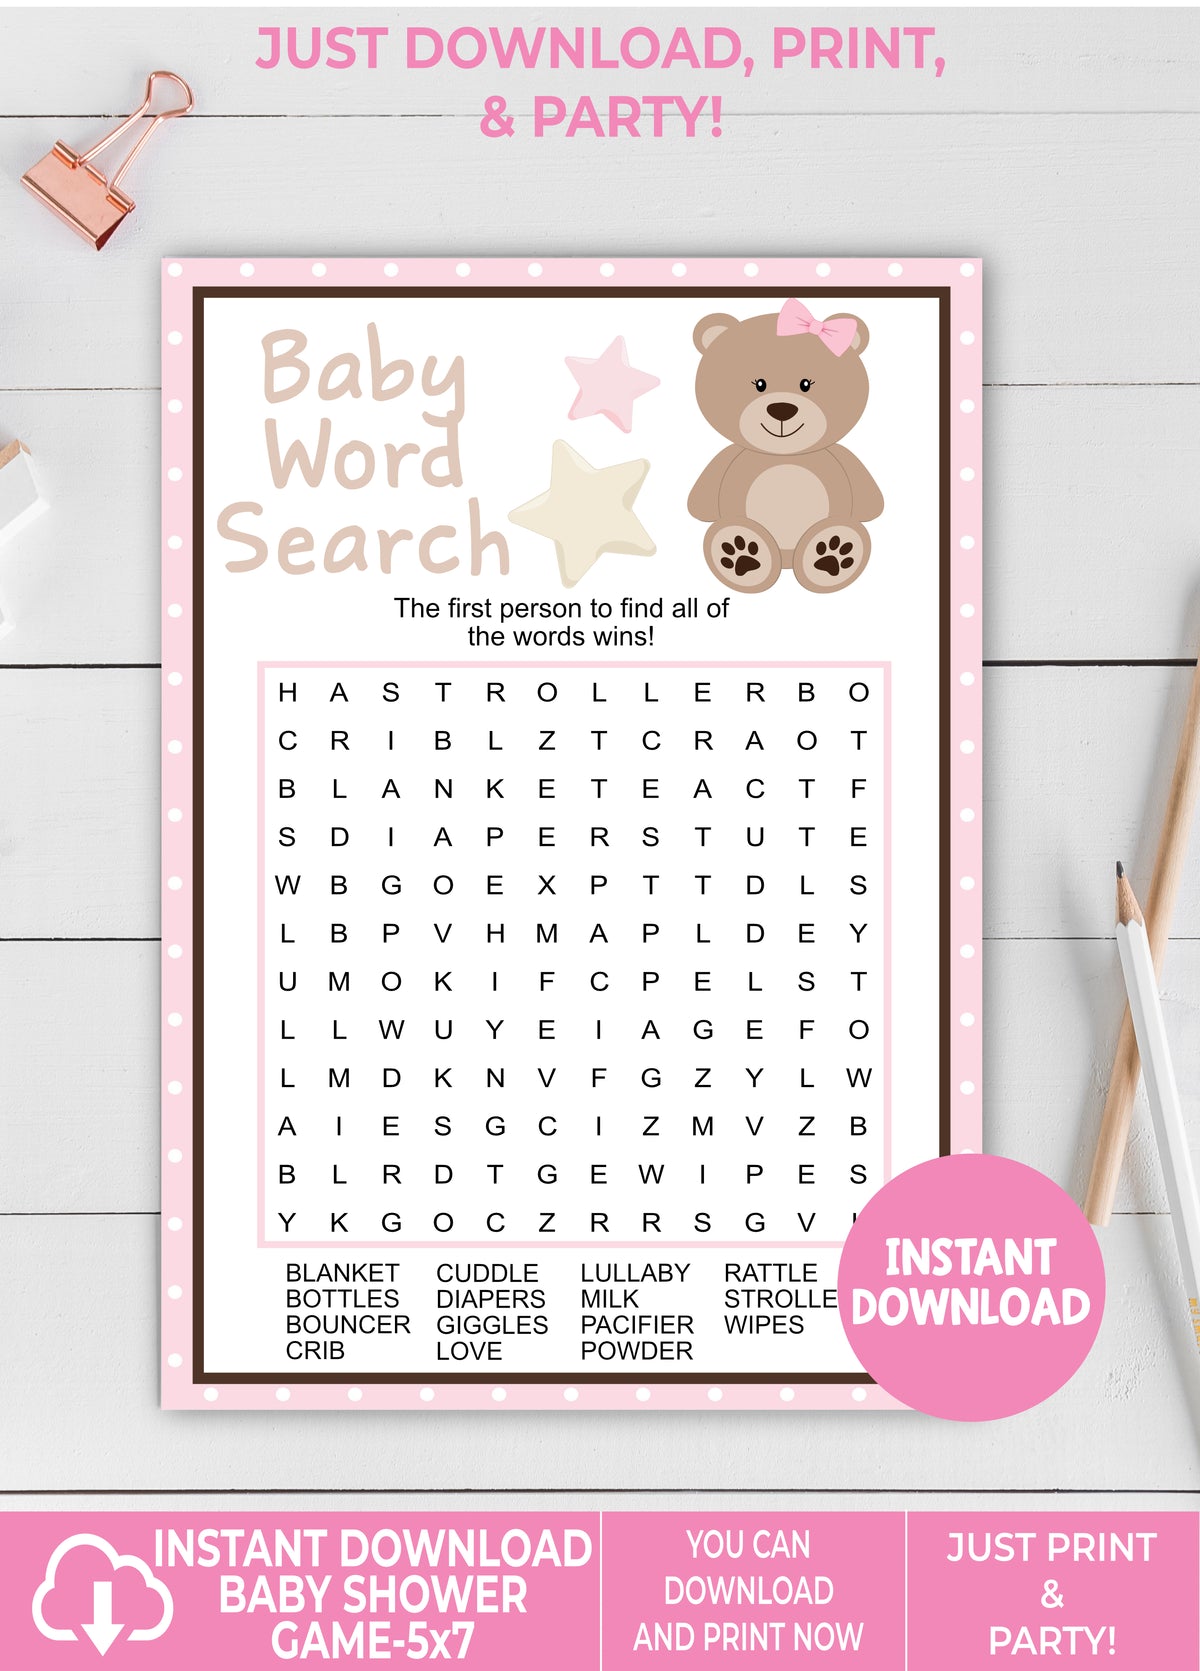 Teddy Bear Baby Shower Games Printable Pack - Baby Shower Games Package PDF